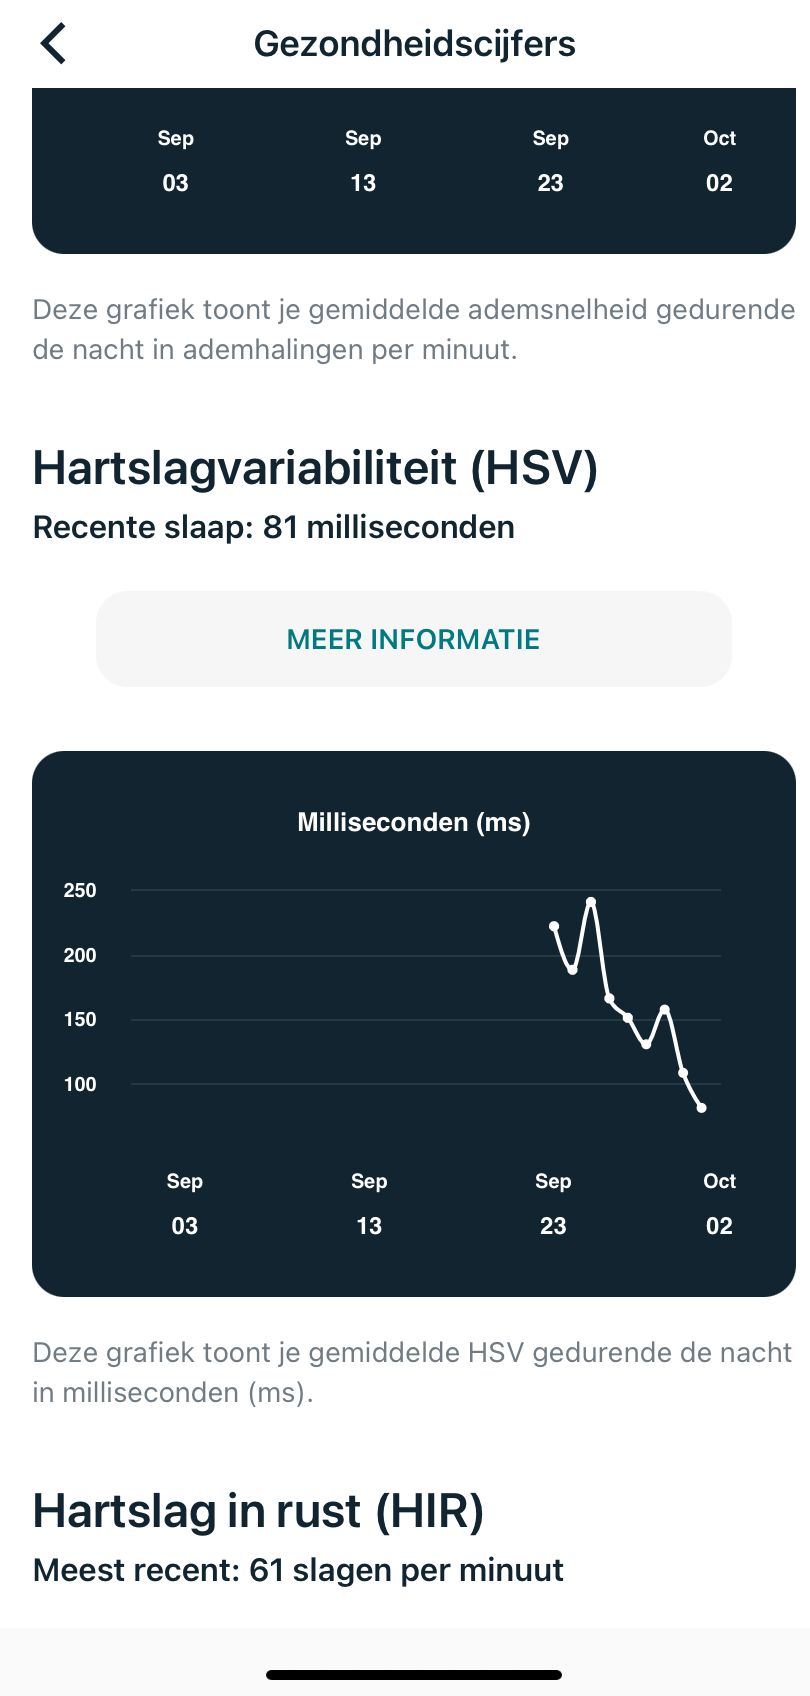 fitbit hrv tracking